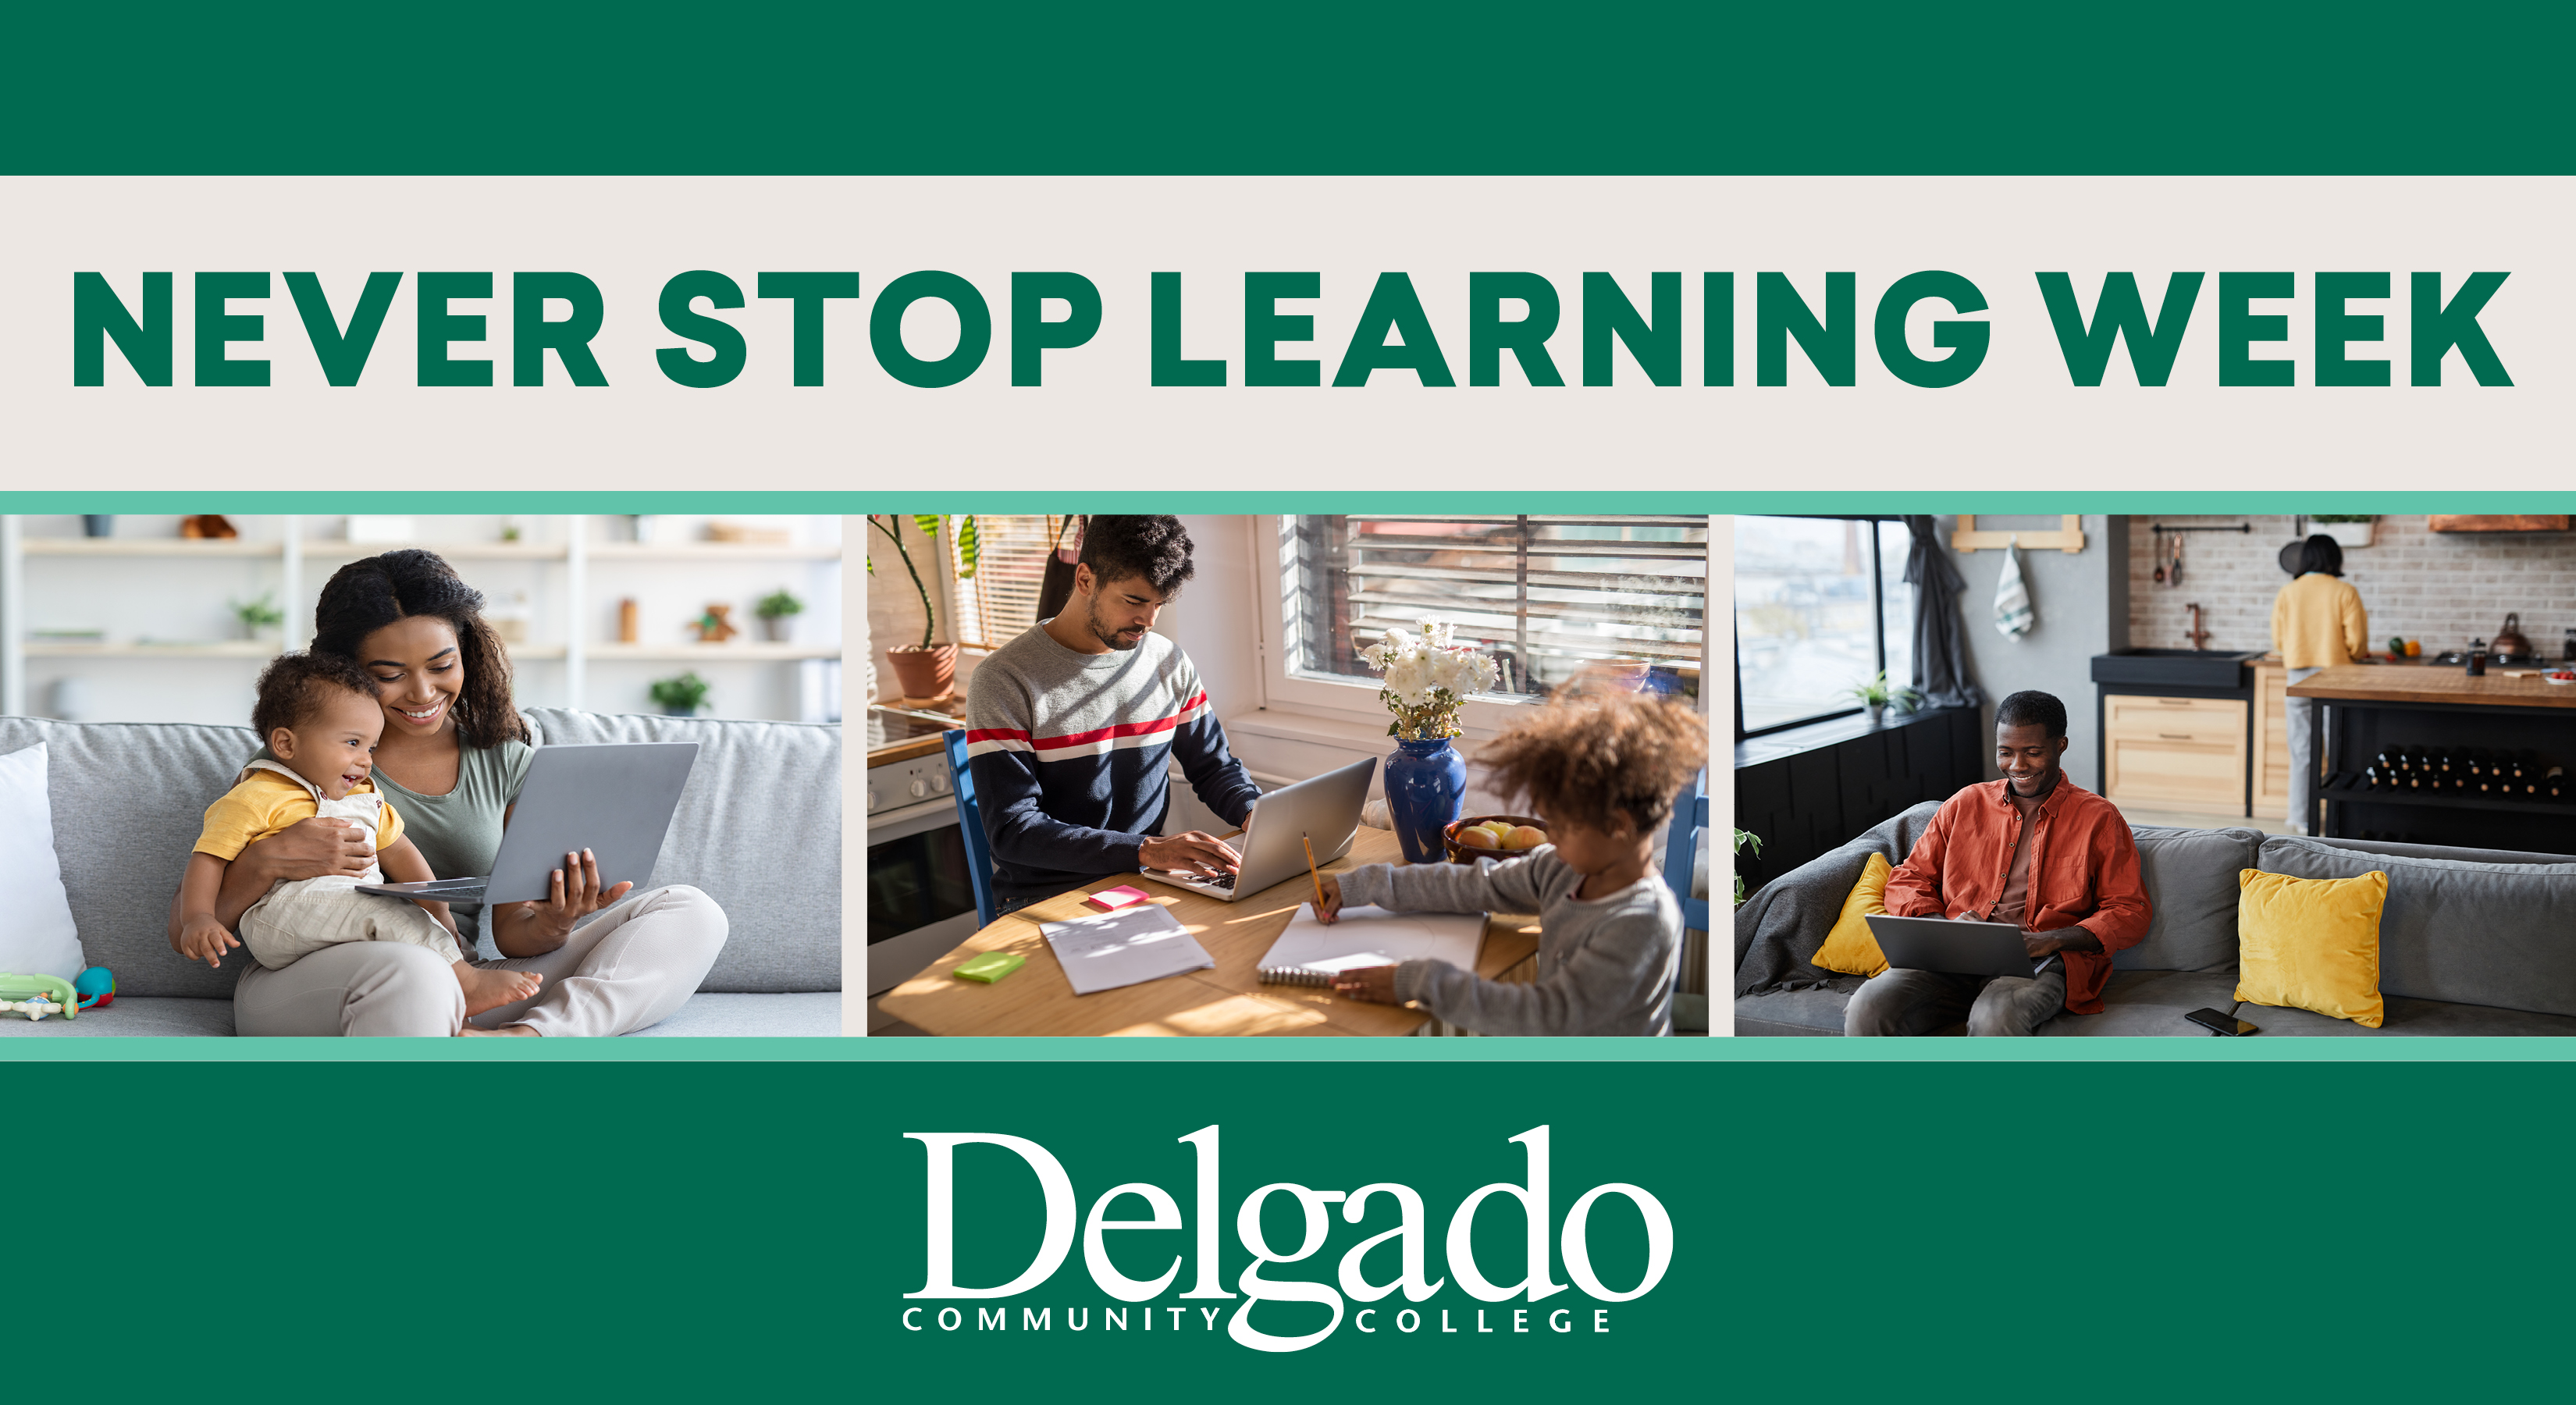 Never Stop Learning Week title followed by 3 images: 1. Black mom and baby with laptop, smiling 2. White dad with Black son doing homework at kitchen table, 3. Black male on couch with laptop smiling 